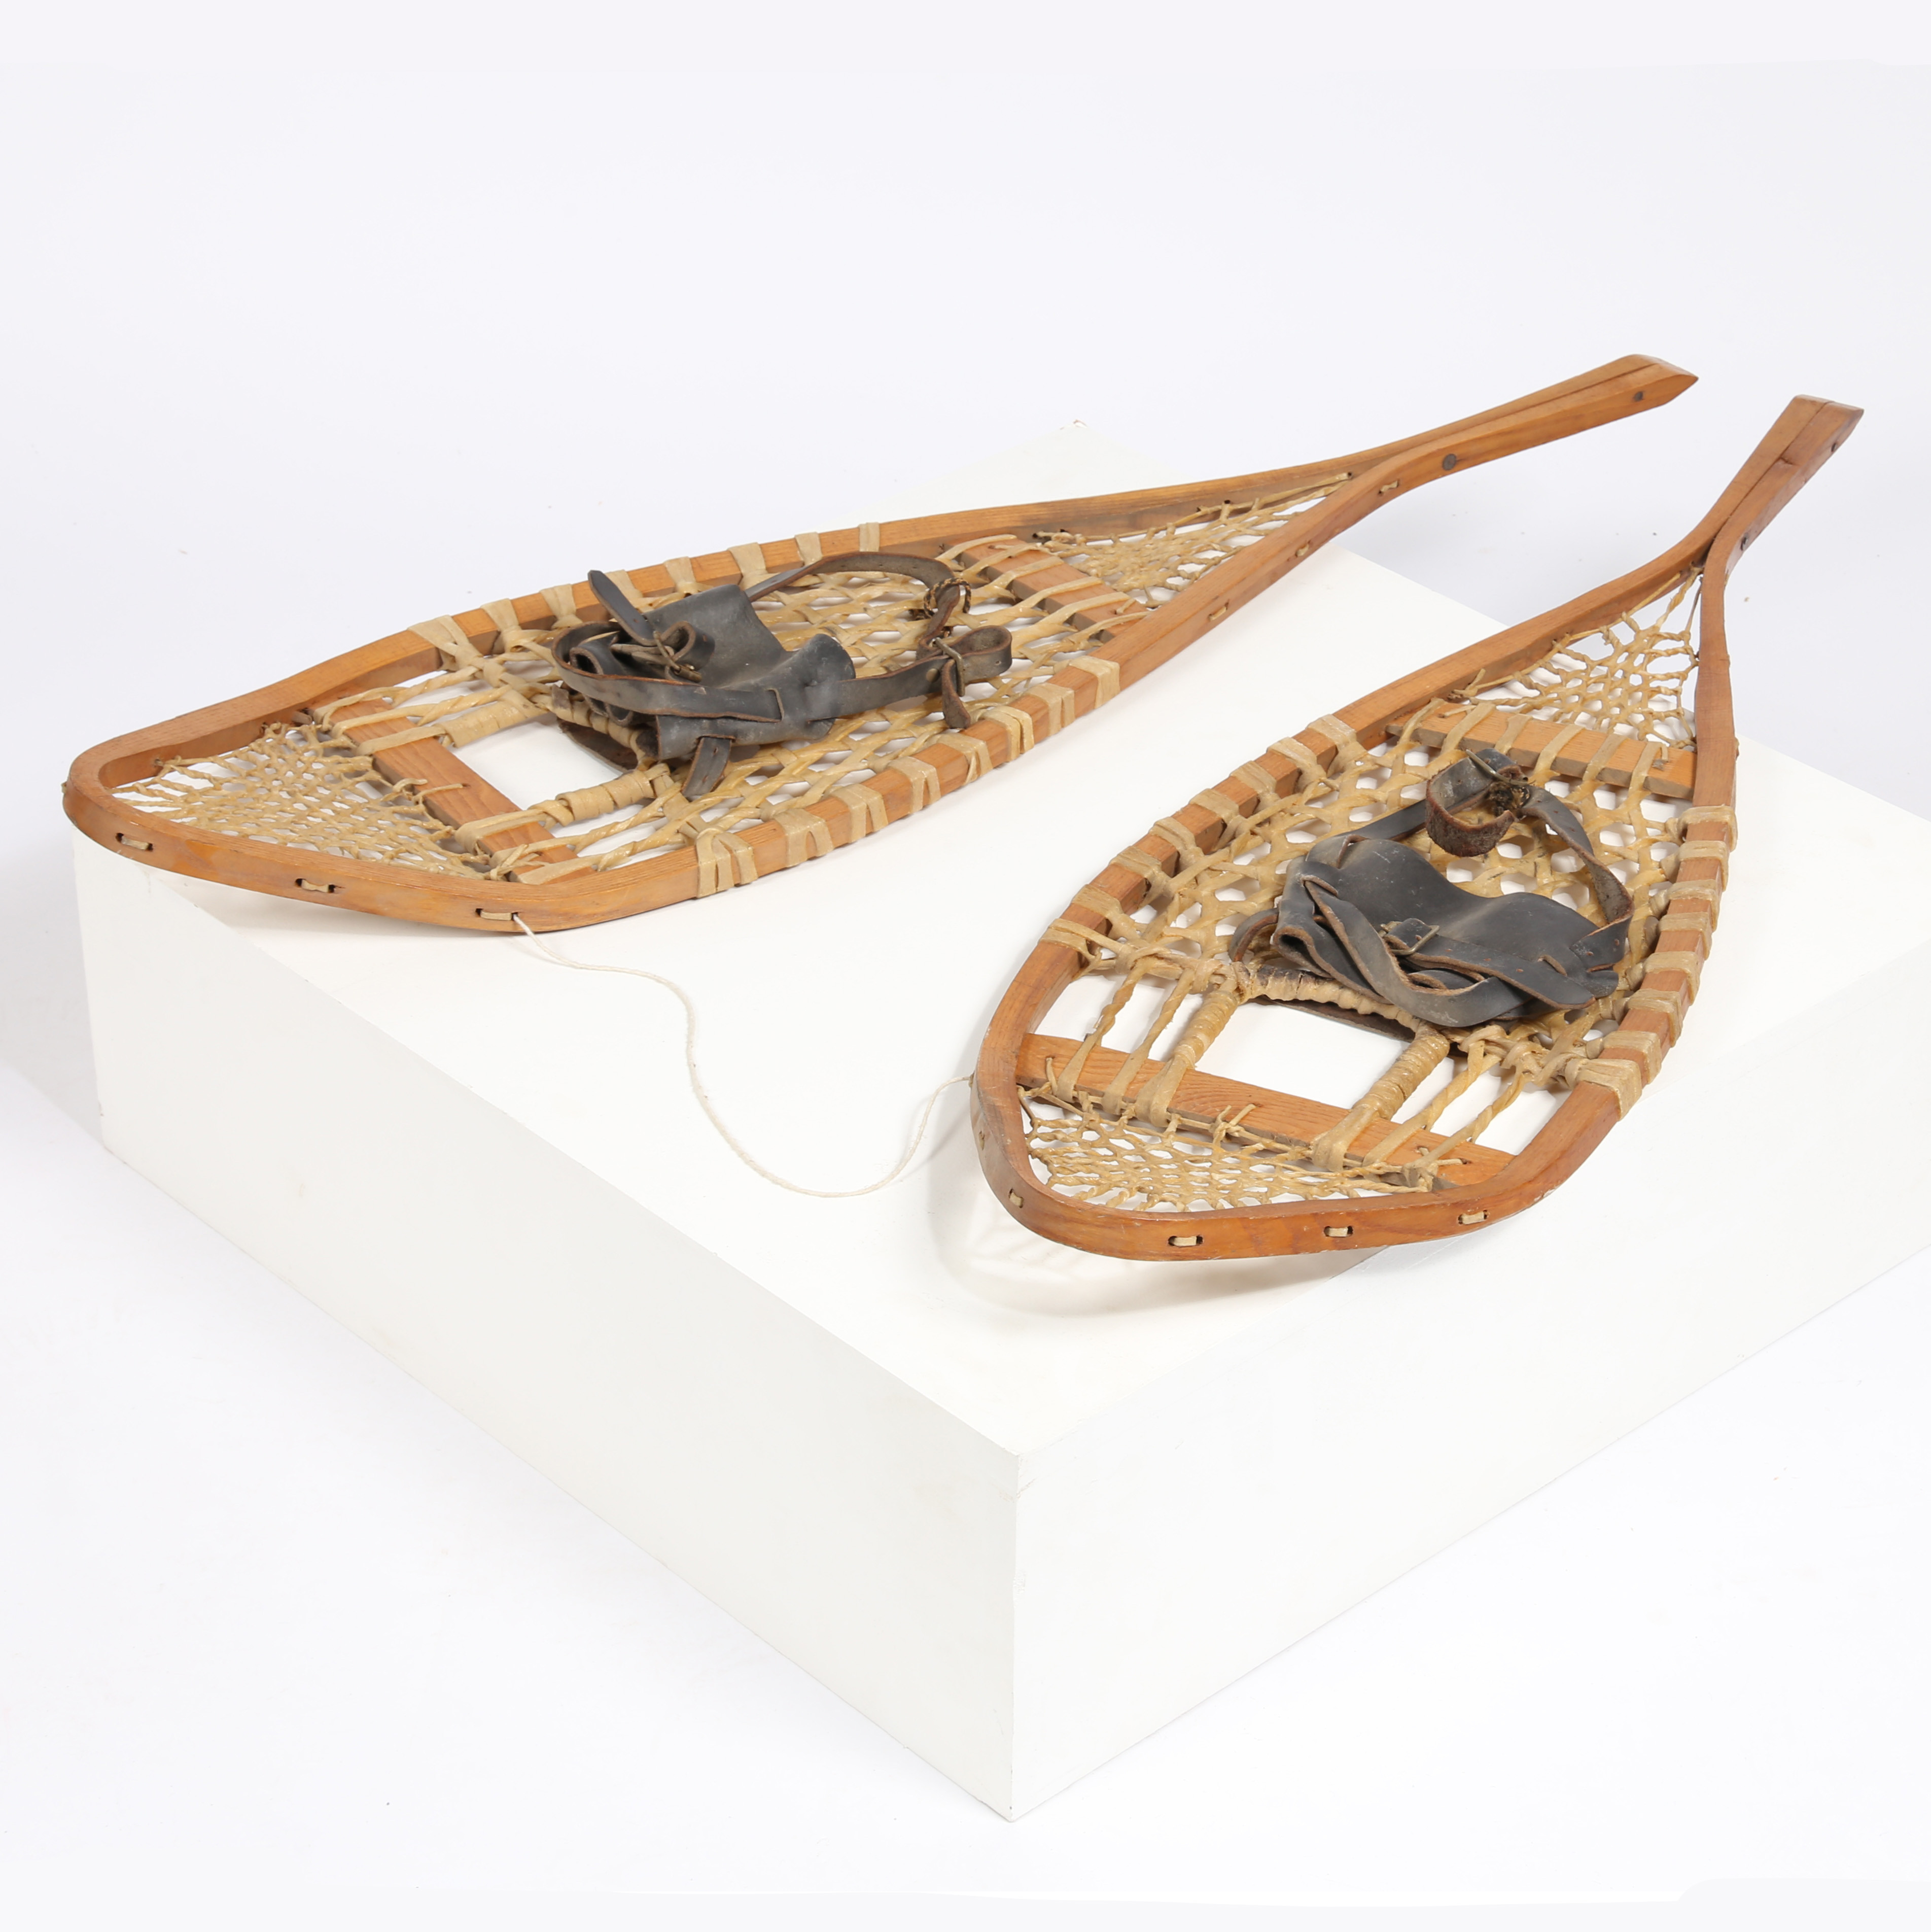 A PAIR OF EARLY 20TH CENTURY PINE RACKET SHAPED SNOW SHOES.